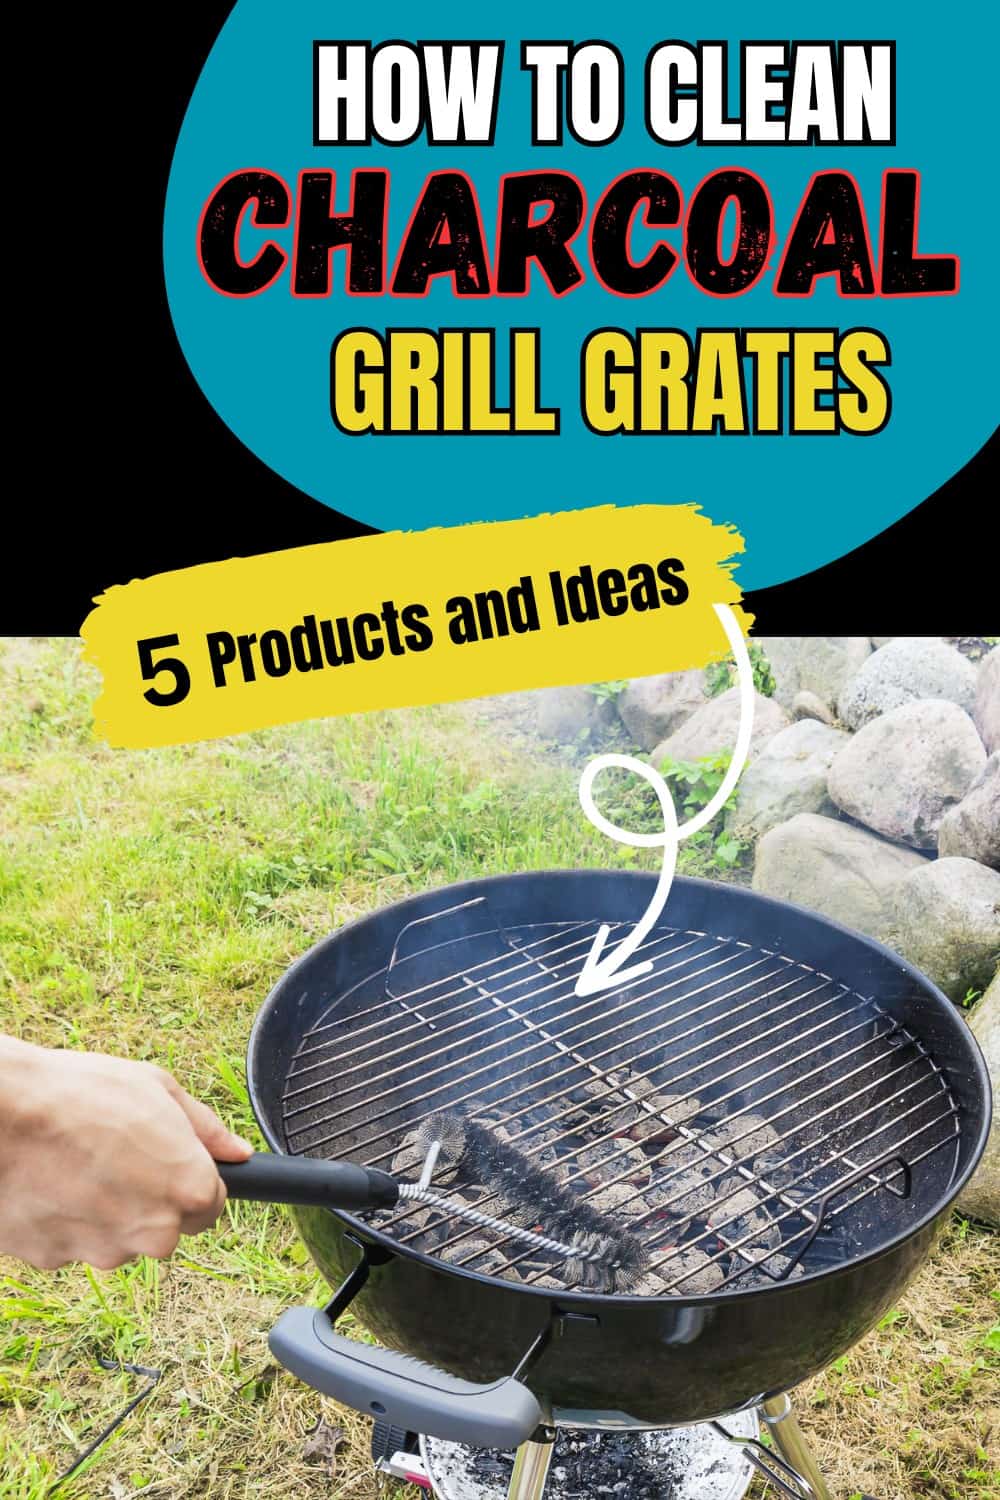 To clean your charcoal grill grates effectively you need a spray cleaner